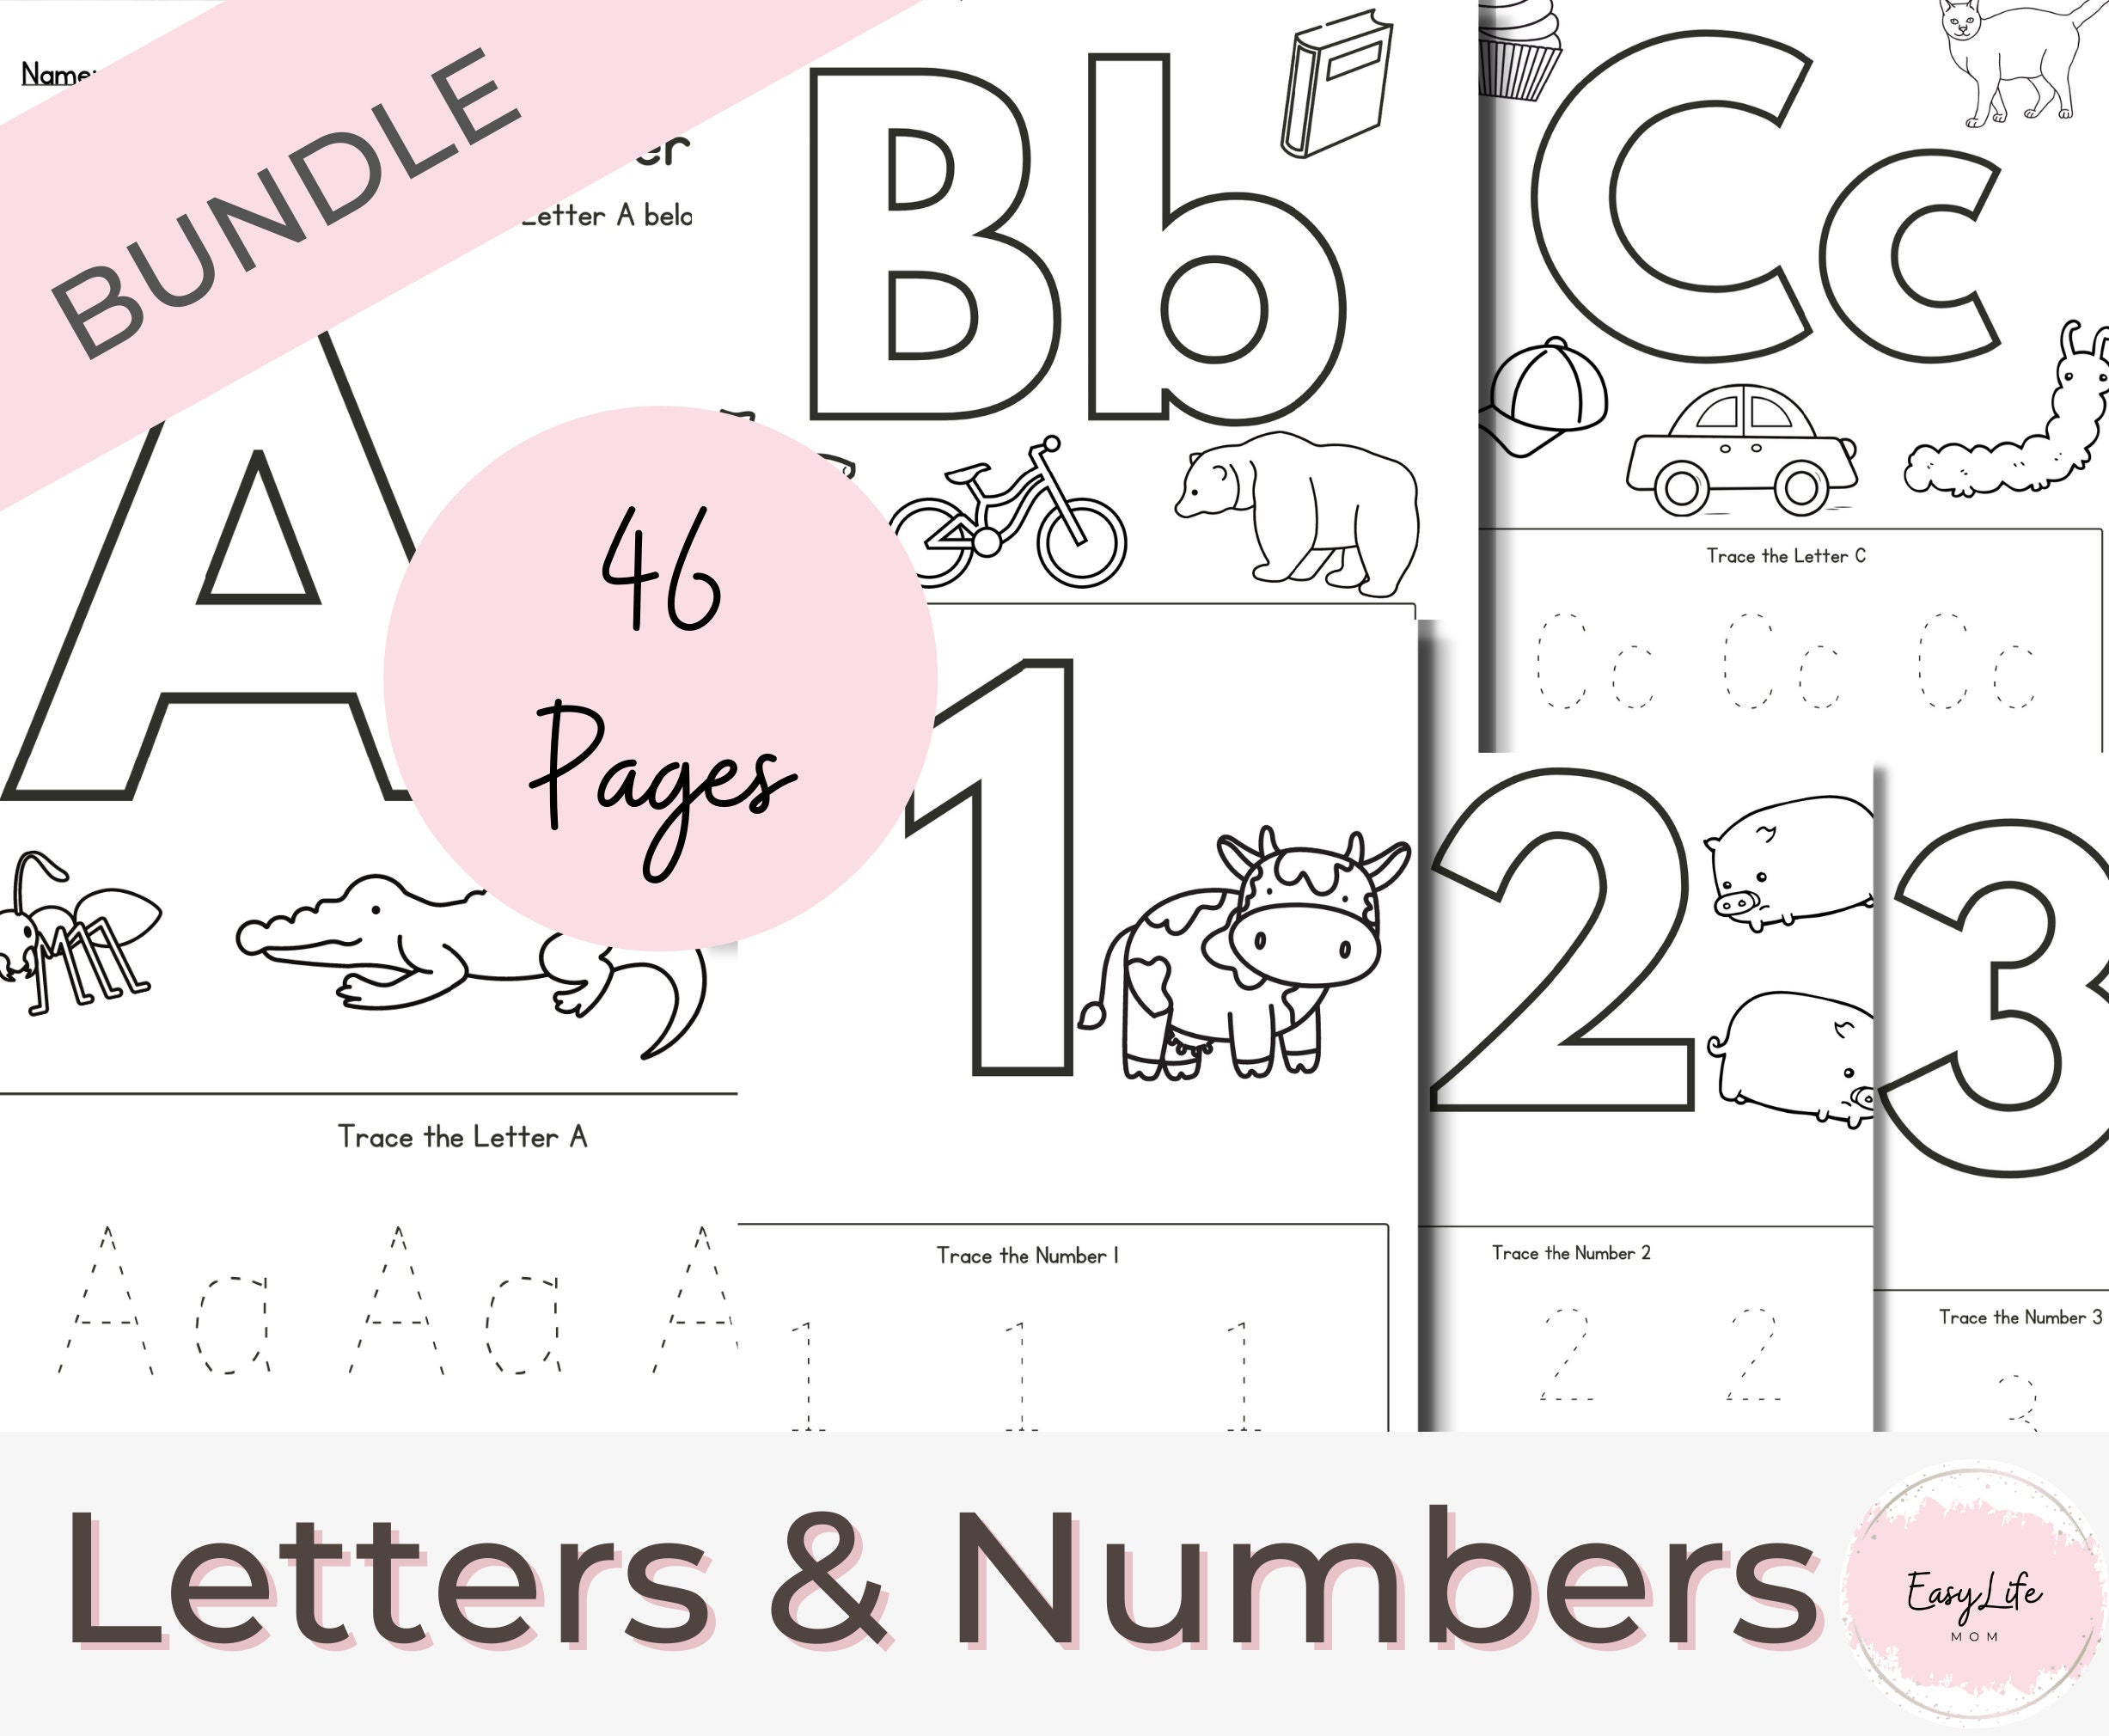 Letter Tracing: Letter Tracing Paper-Perfect For Kids Letter Tracing Books Preschoolers 3-5 Kindergarten Toddlers Boys Girls Kida Age 3-5 With Hand Lettered Design Tracing Paper [Book]